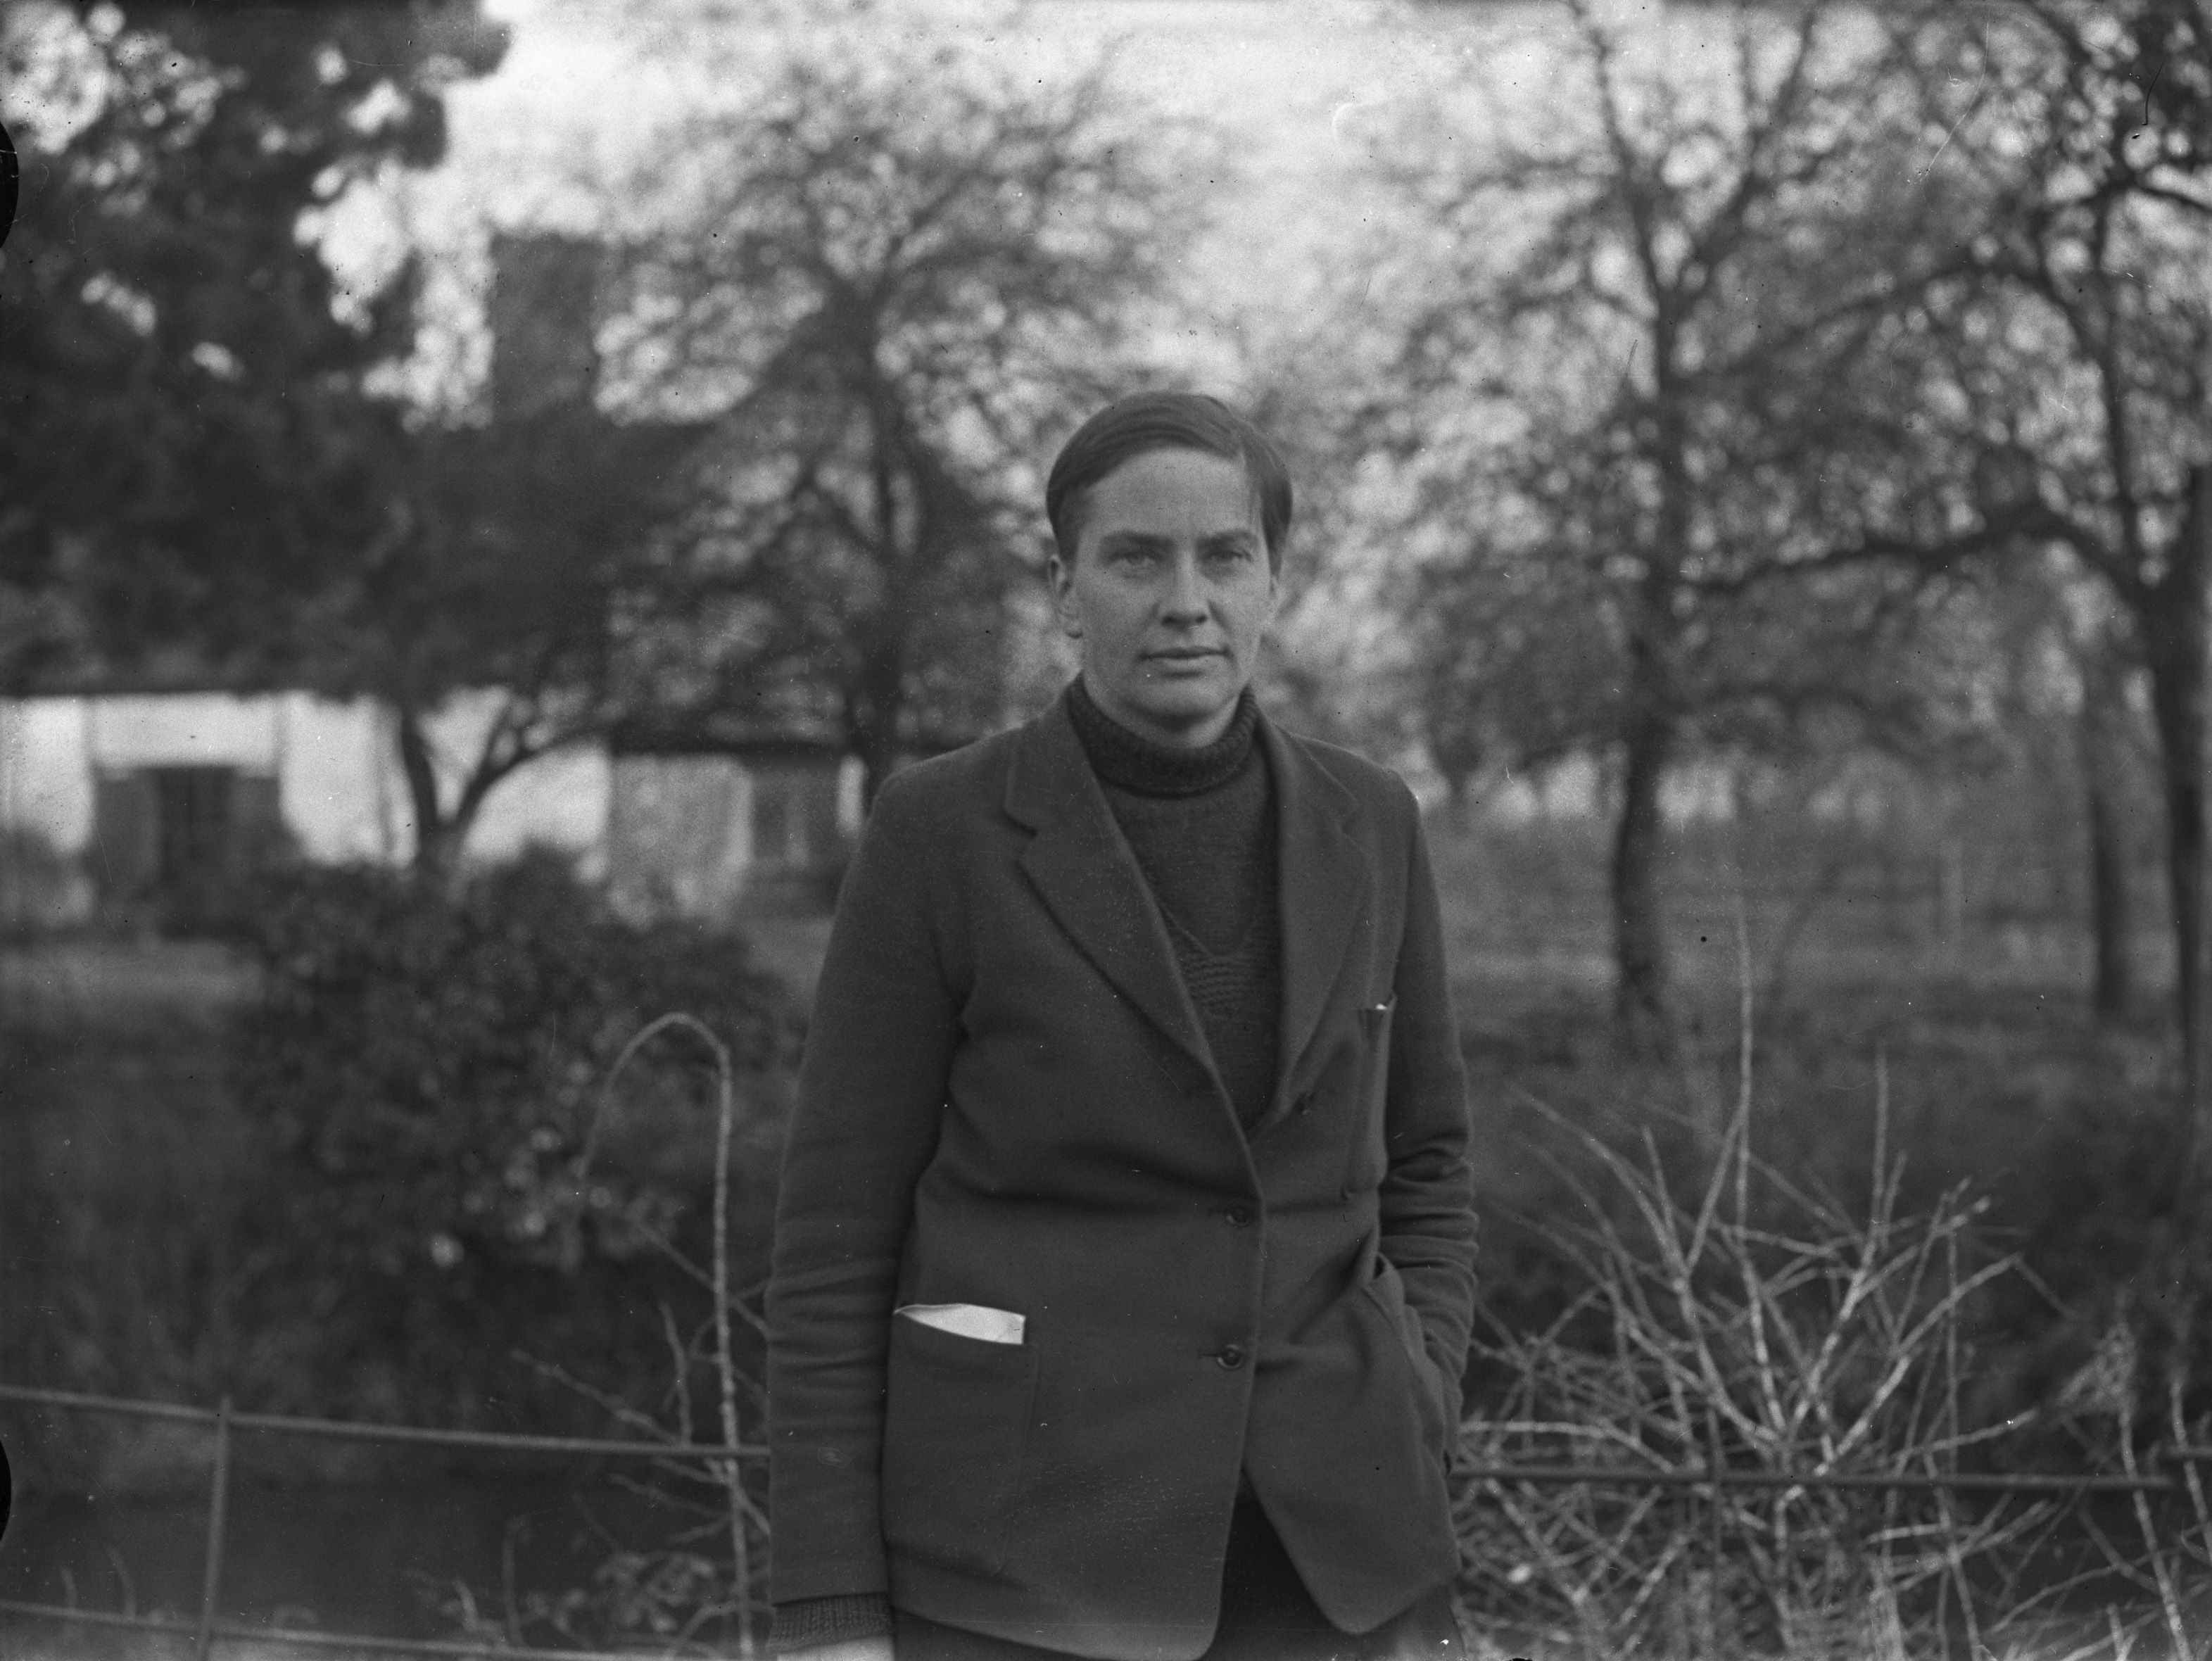 A black and white photograph of Lady Eve Balfour with trees and a house in the background